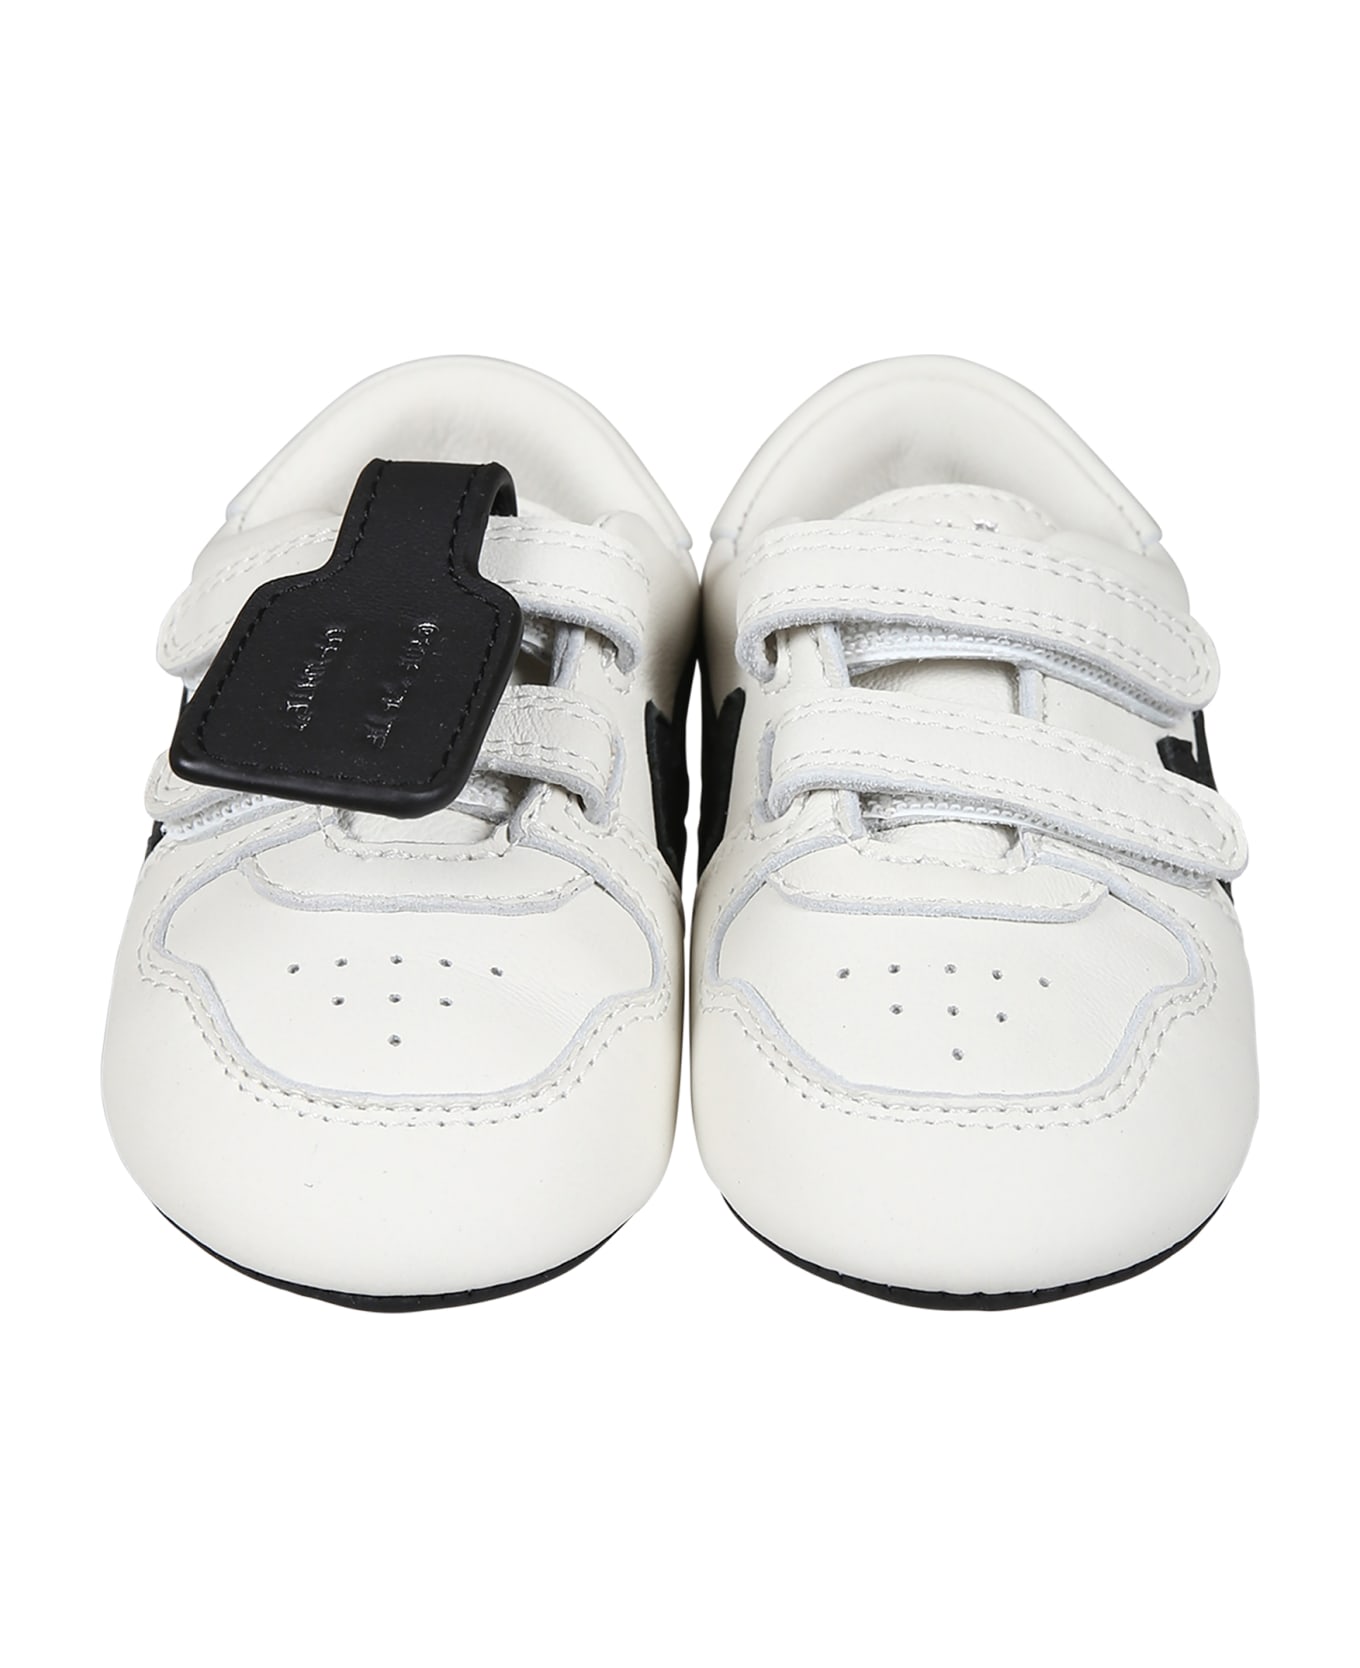 Off-White White Sneakers For Baby Kids With Iconic Arrow - White シューズ